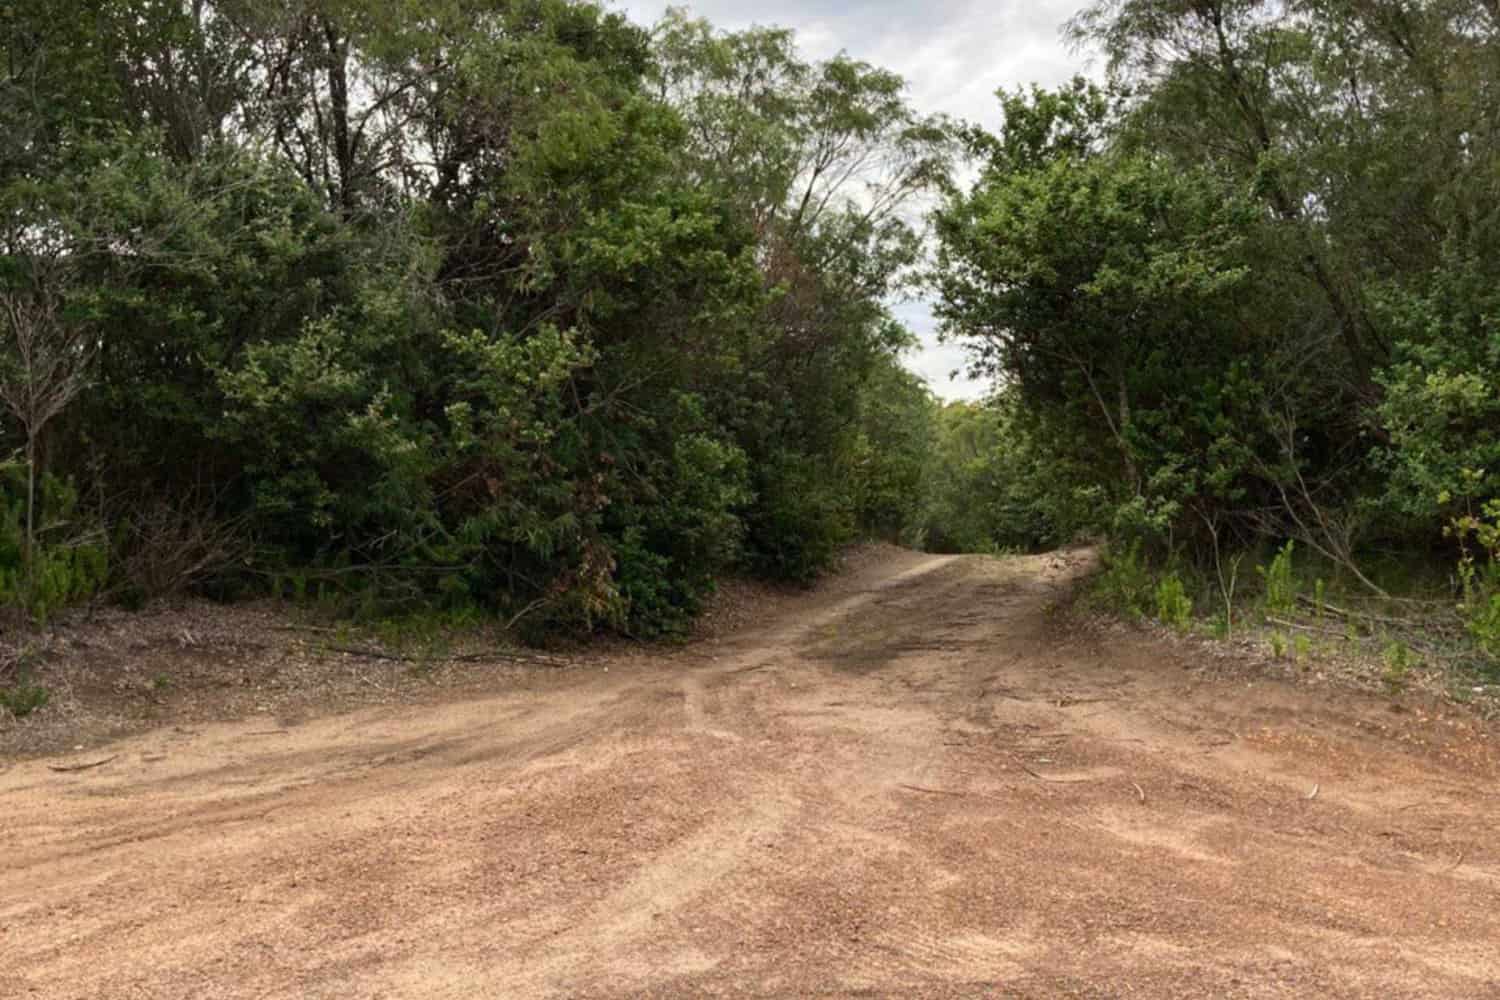 A fork in a dirt road within an Australian bushland, demonstrating a common driving scenario where choosing the correct path is crucial. This scene underscores the importance of planning and navigation for driving in Australia, especially in remote areas.